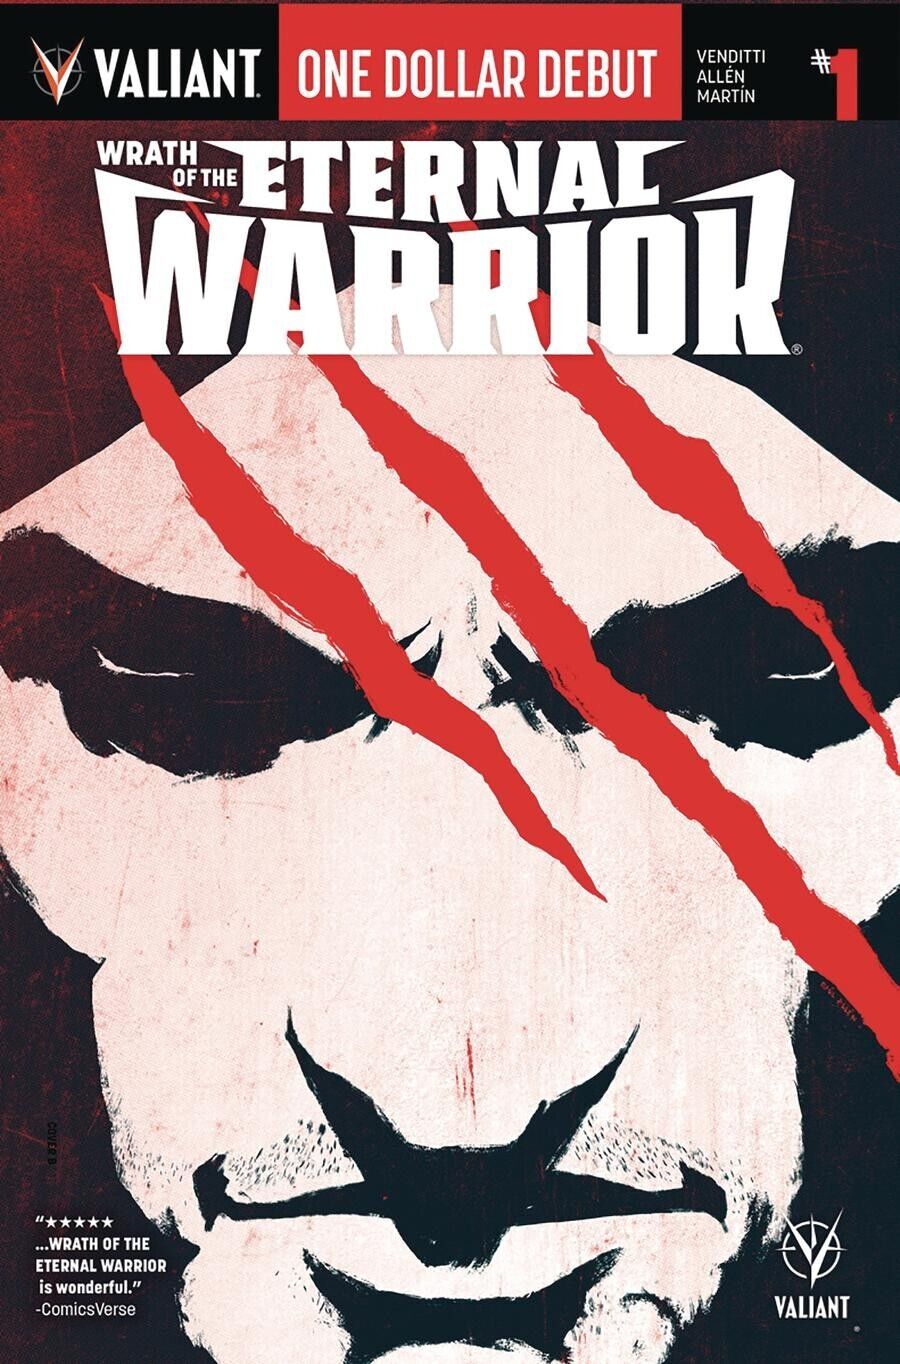 WRATH OF THE ETERNAL WARRIOR #1 ONE DOLLAR DEBUT EDITION 2019 VALIANT NM